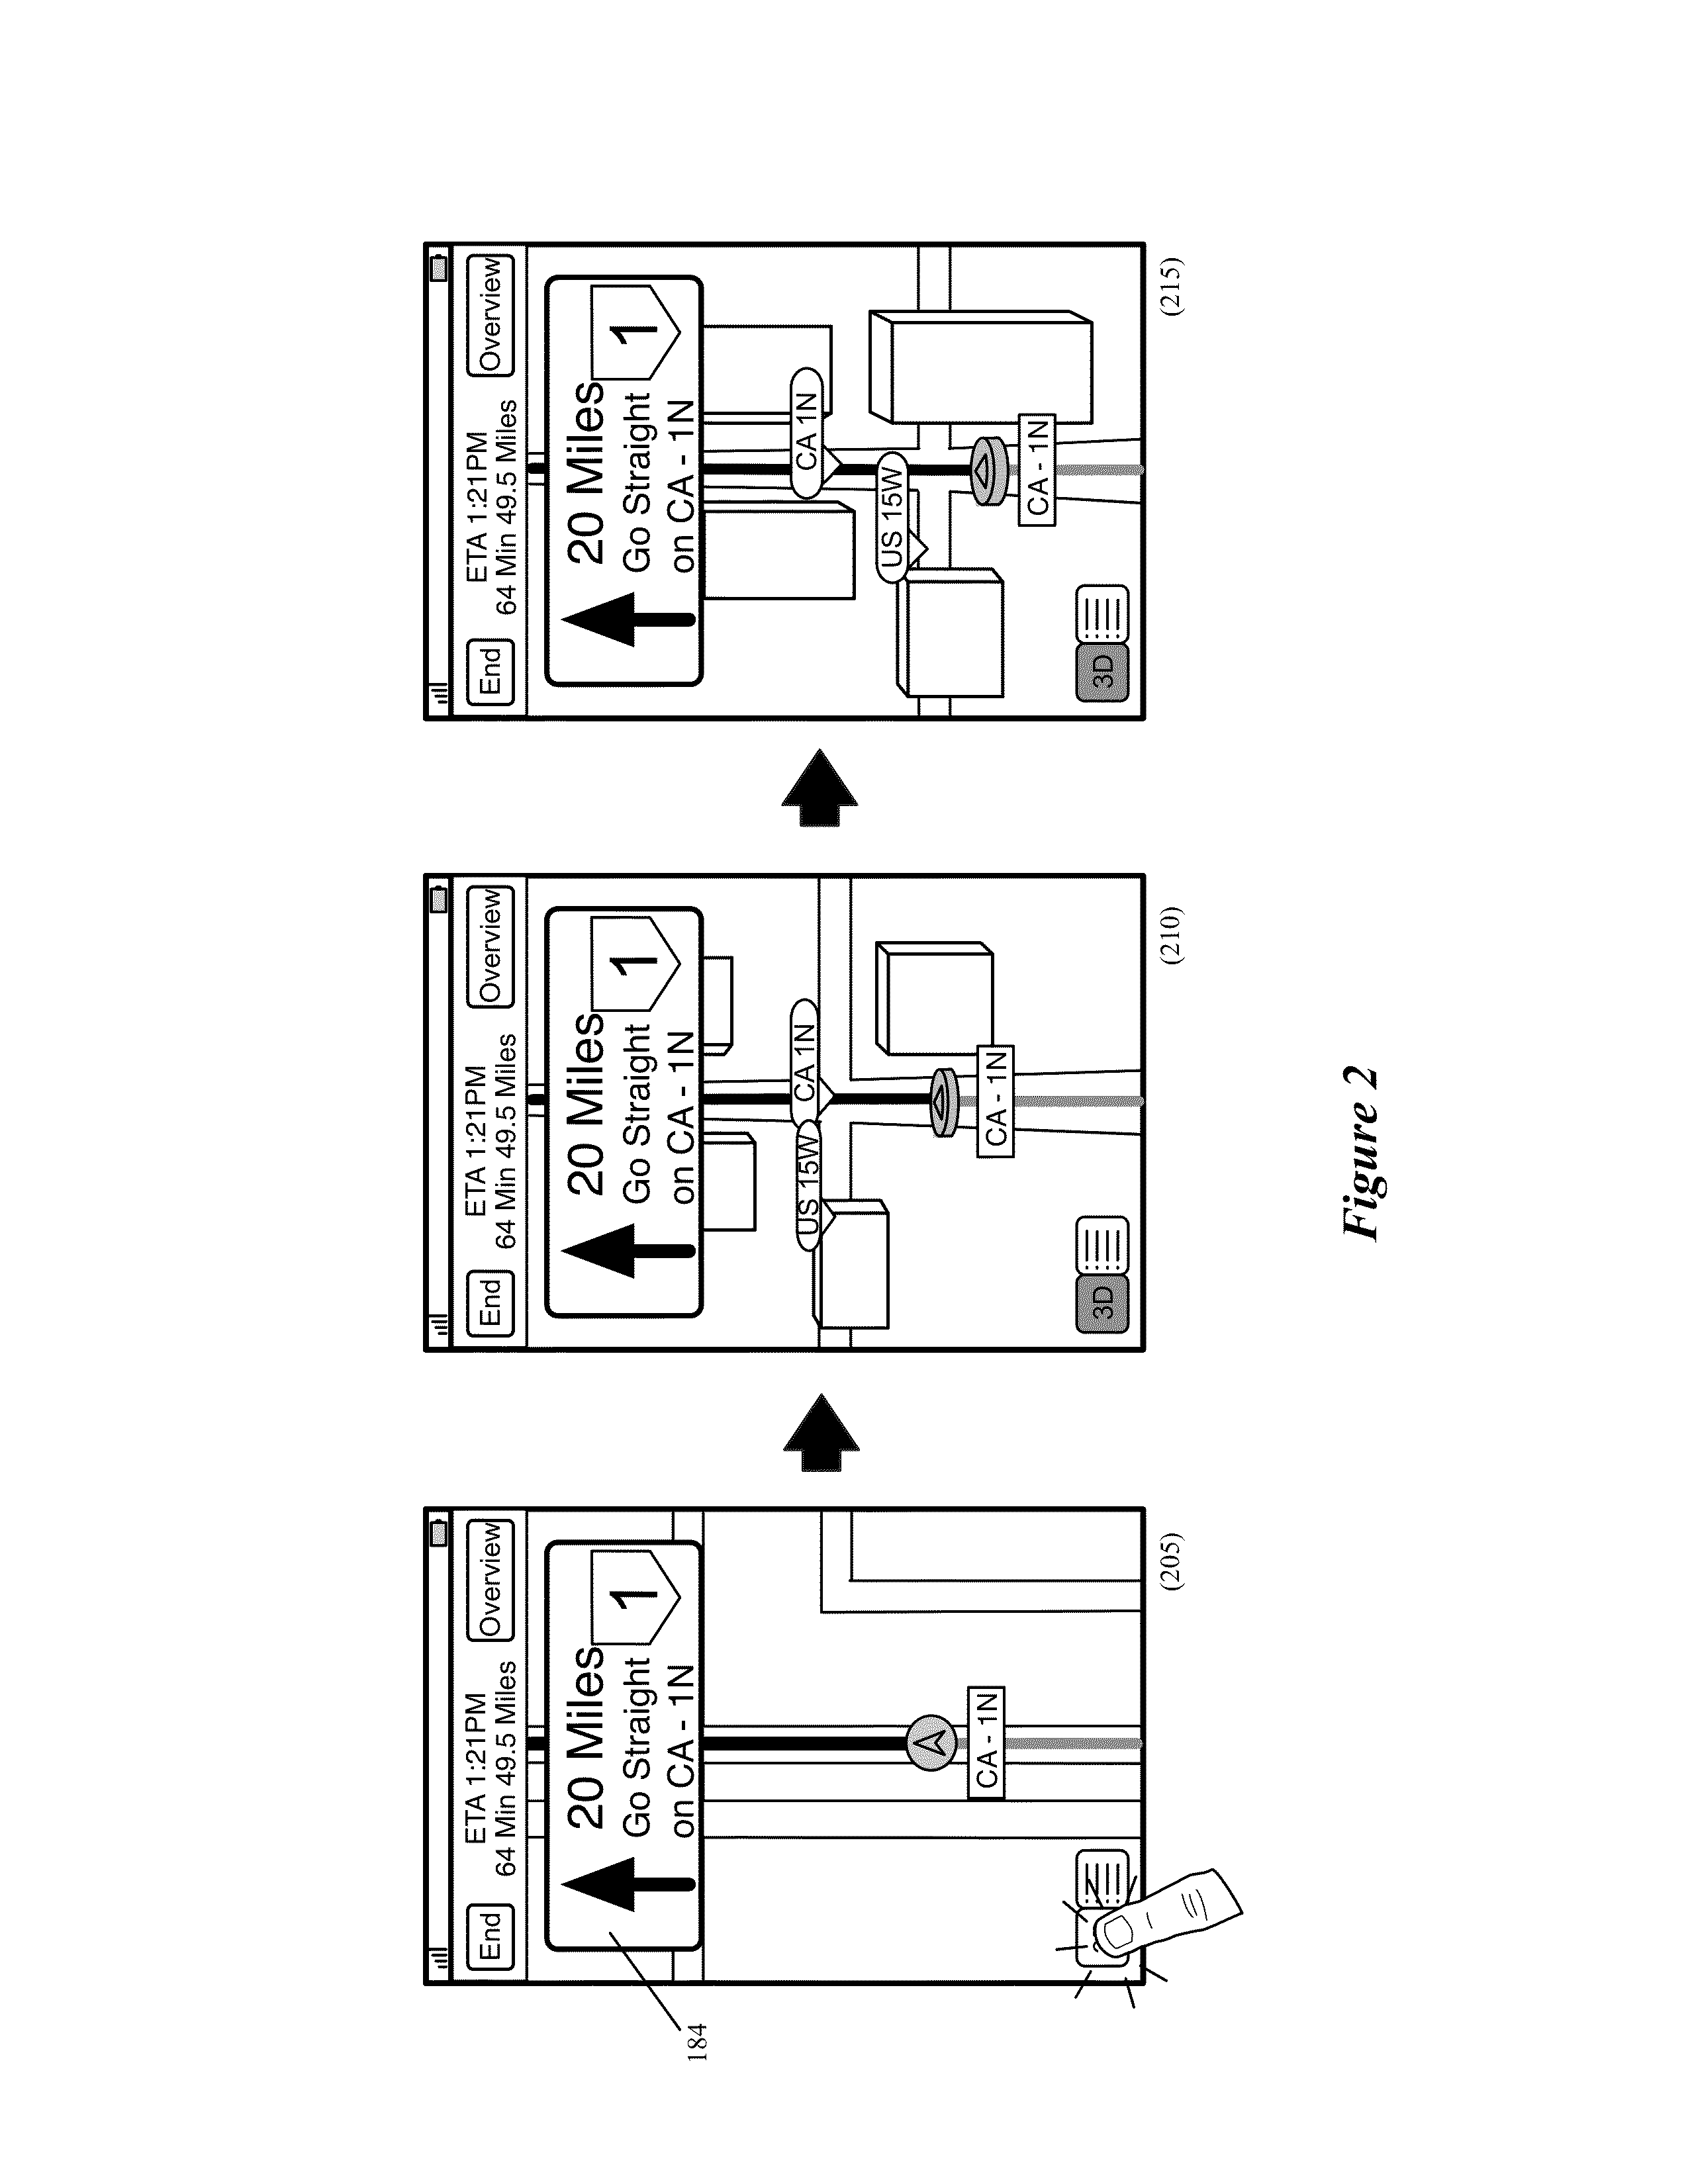 Generating Land Cover for Display by a Mapping Application